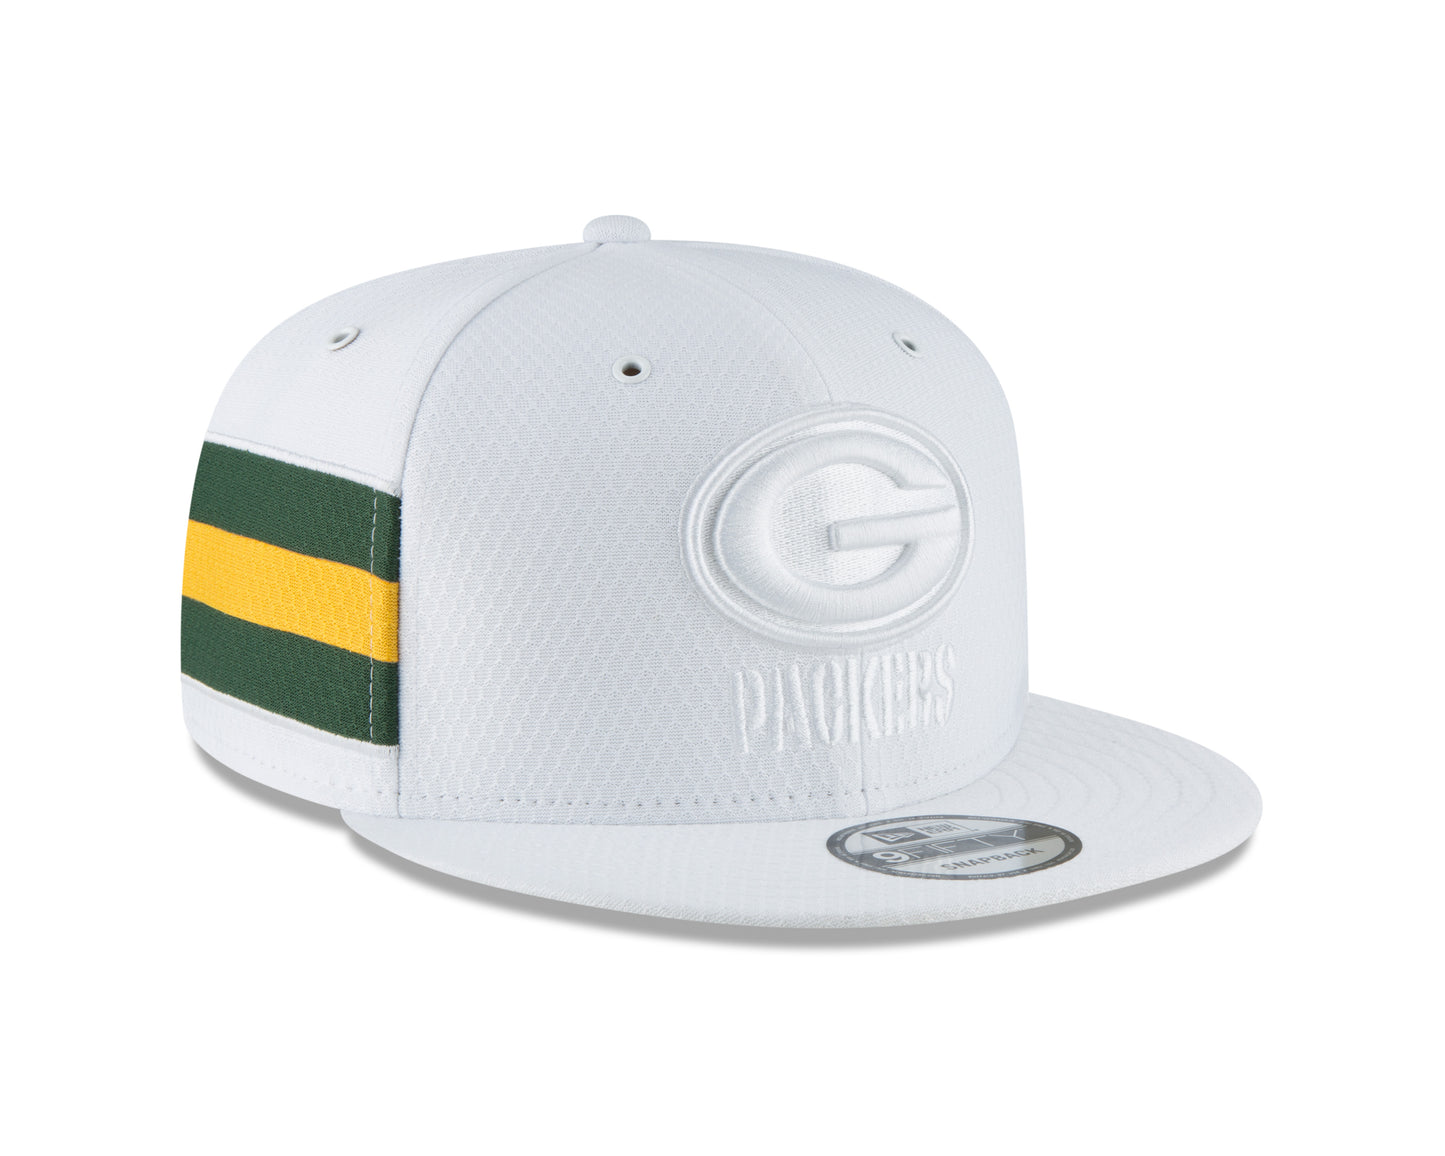 Green Bay Packers New Era Color Rush 9FIFTY Snapback Hat - White